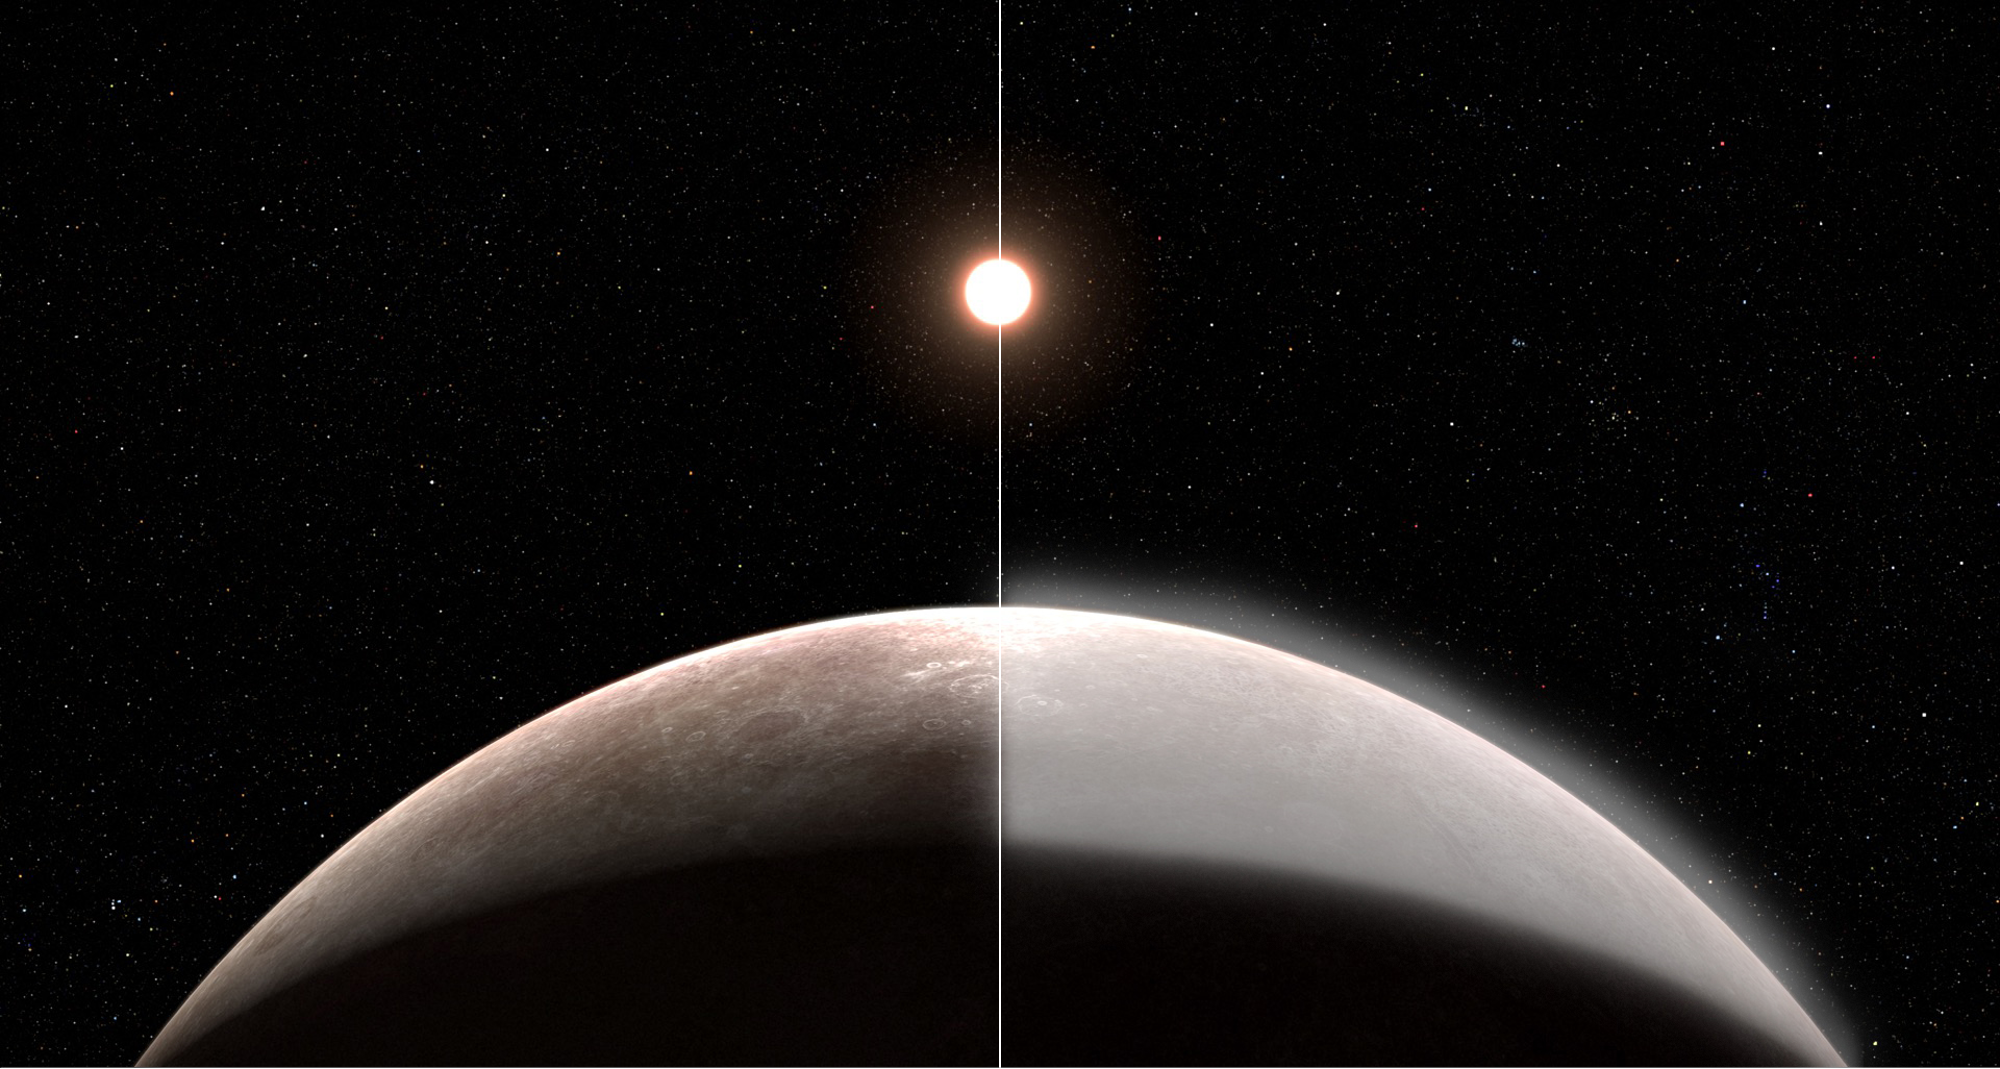 Illustration of a planet and its star on a black, starry background. The planet is large, in the foreground at the center and the star is smaller, in the background at the upper left. A line splits the planet in half, with the left showing atmosphere and the right with an atmosphere. The left quarter of the planet (the side facing the star) is lit, while the rest is in shadow.